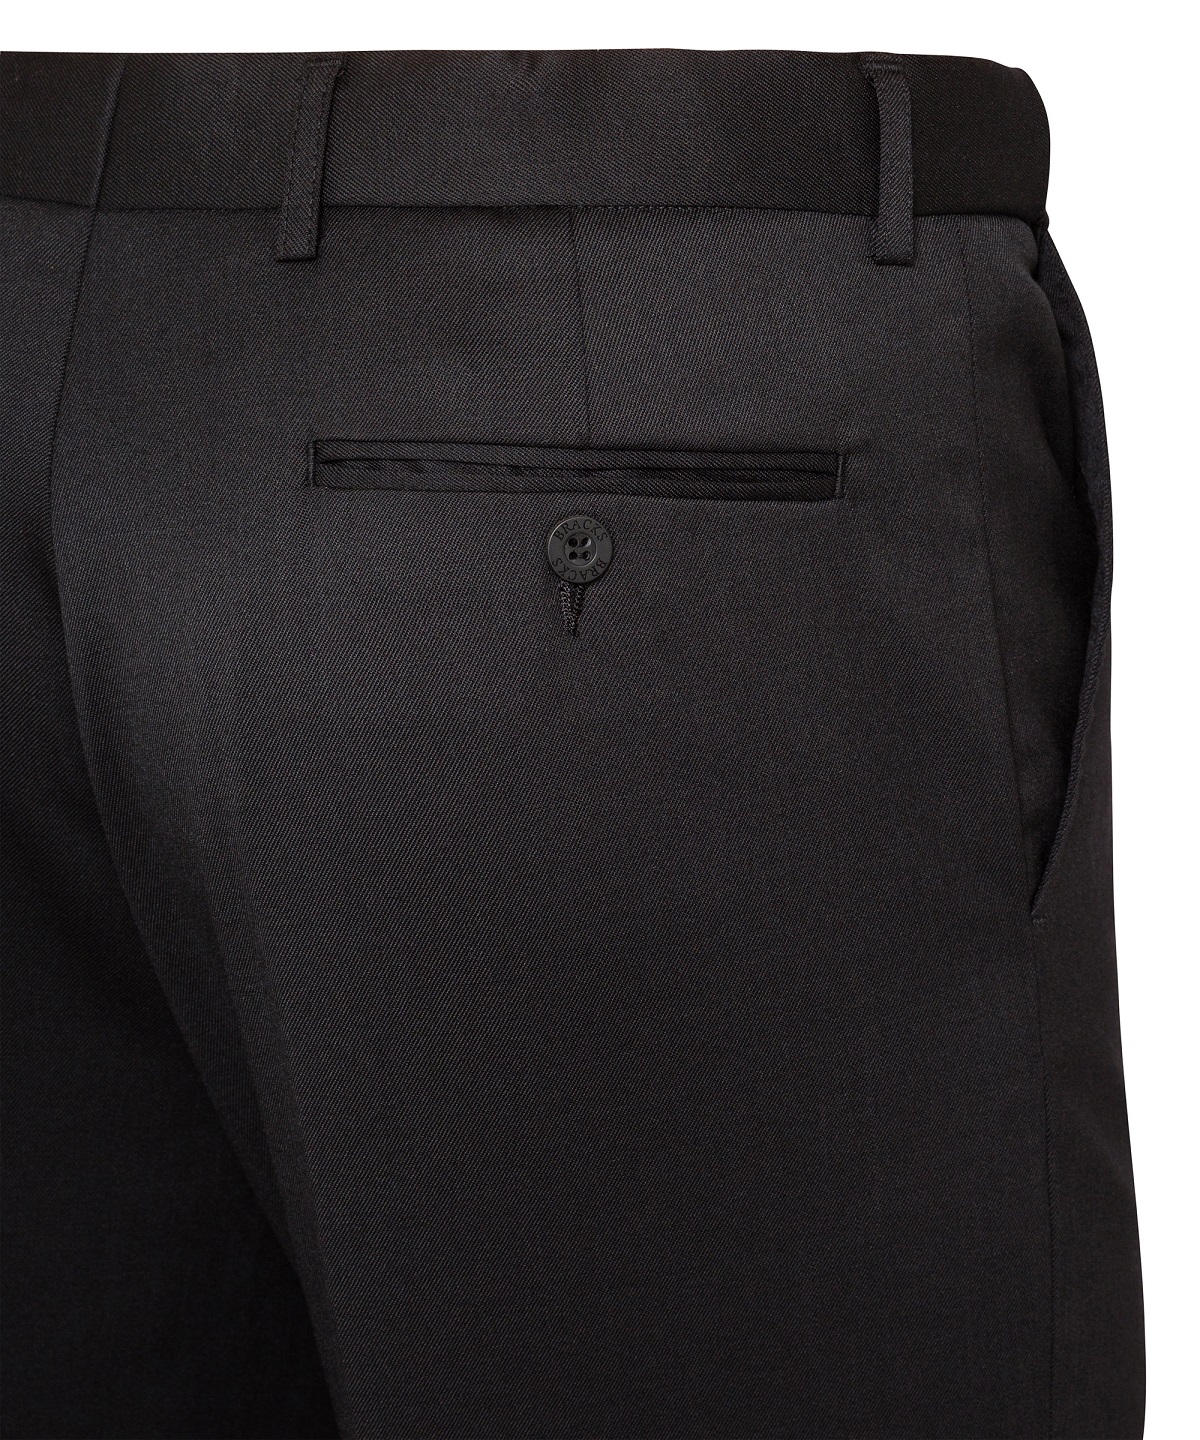 Black Pants for Business | Mens Pants by Bracks. Save up to 25%